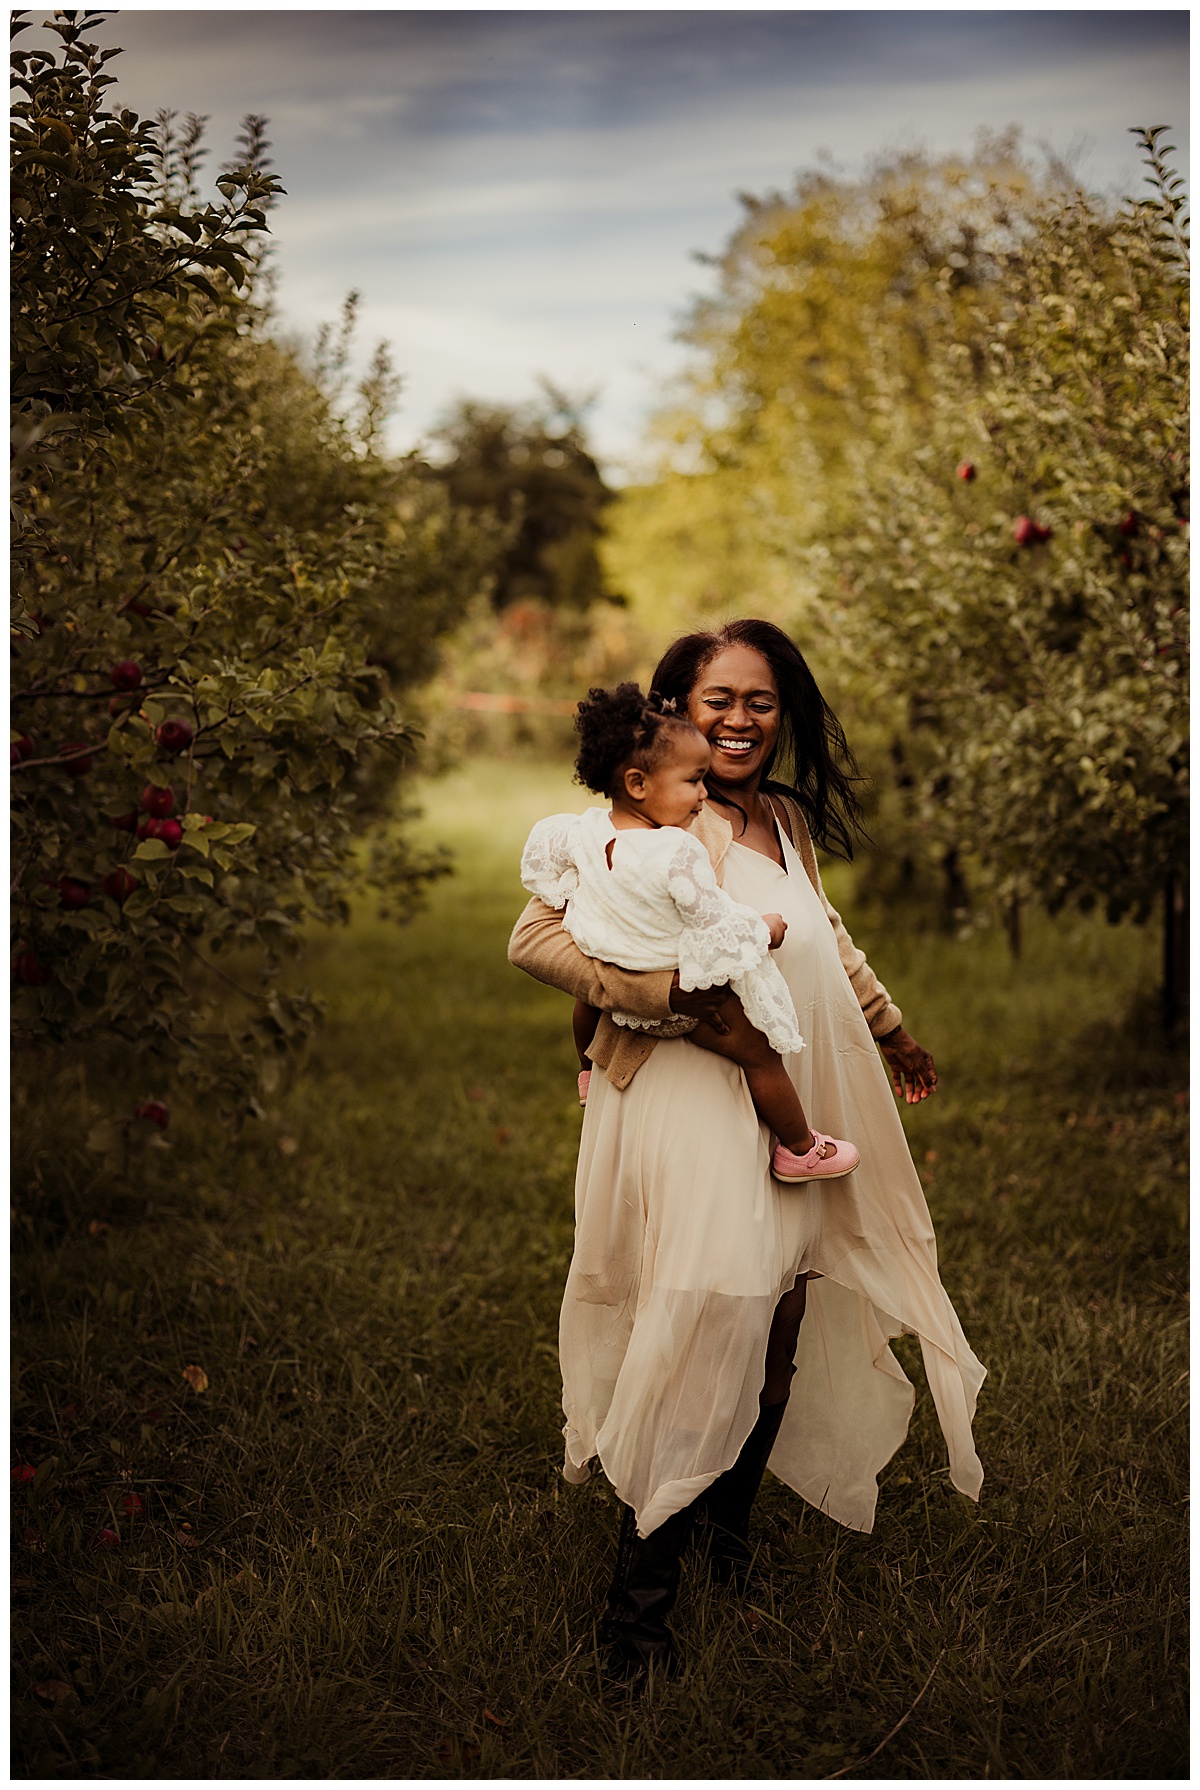 Mother and daughter smile together for Outdoor Adventure Golden Hour Session at Great Country Farms